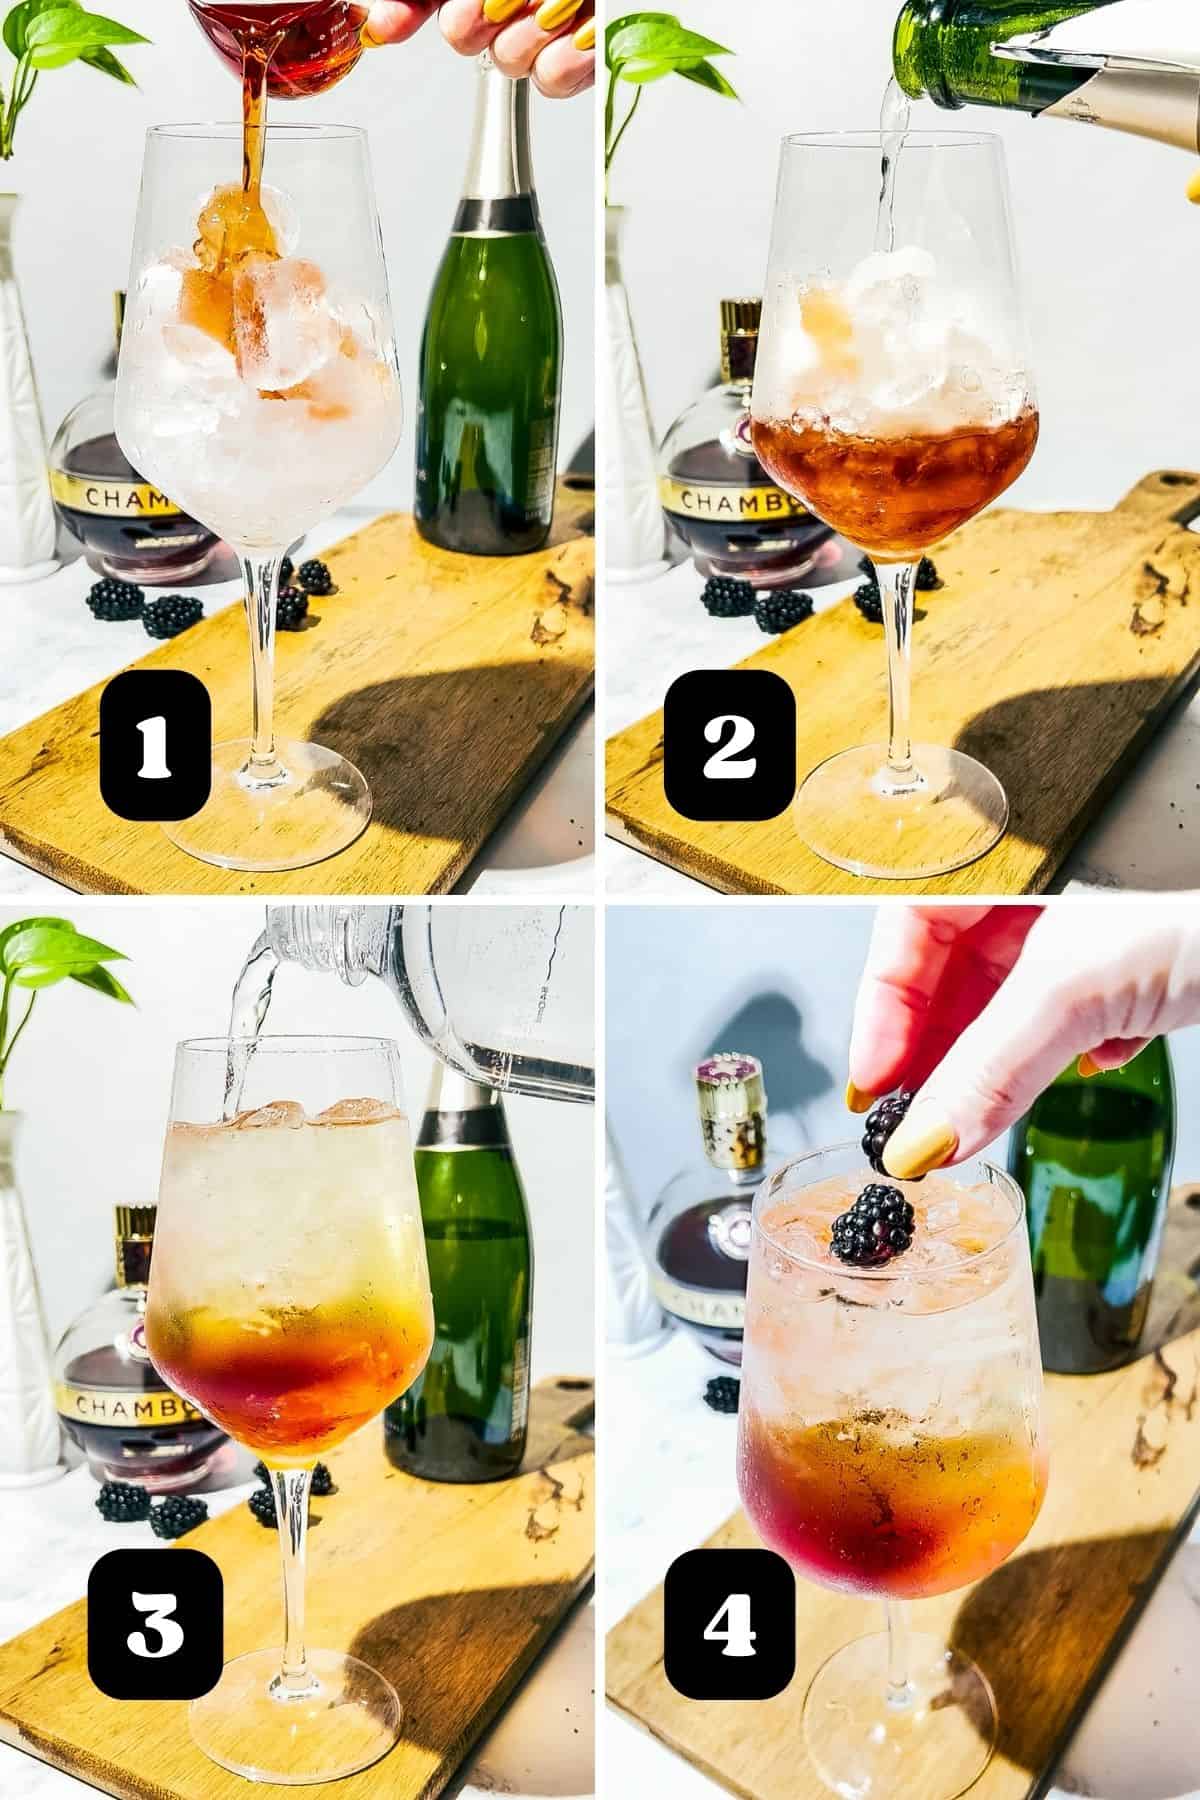 Steps 1-4 demonstrating how to make the cocktail.